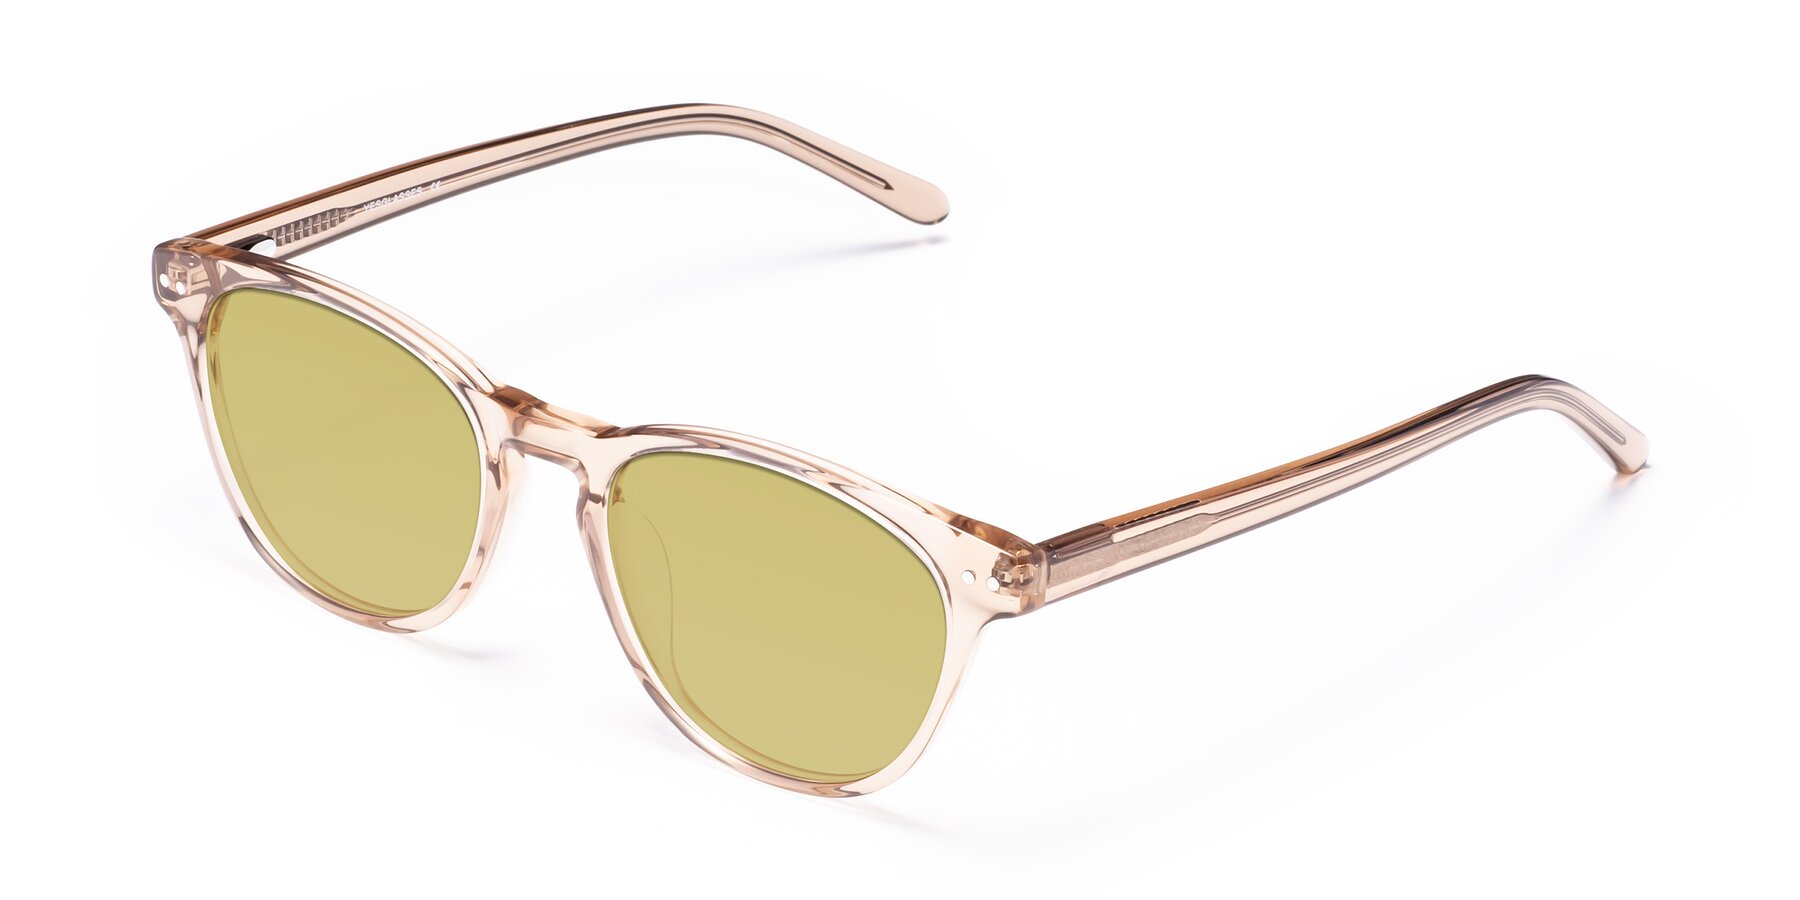 Angle of Blaze in light Brown with Medium Champagne Tinted Lenses